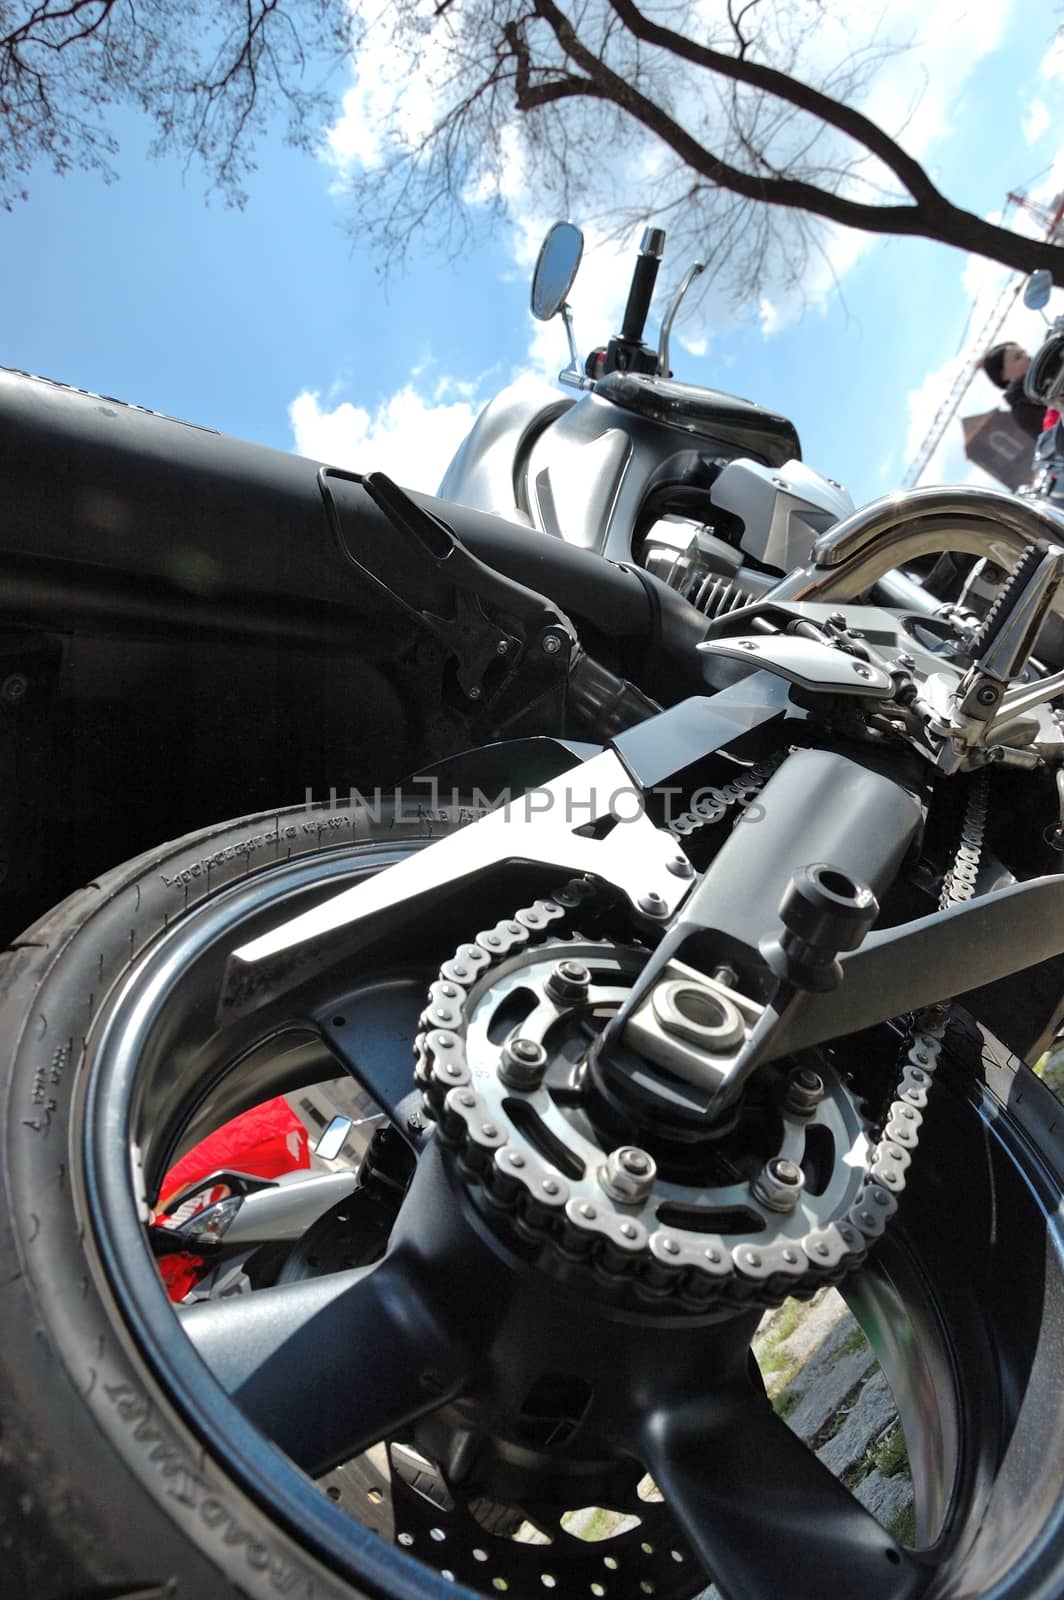 Photo of motorbike from behind with rim, tyre and chain.